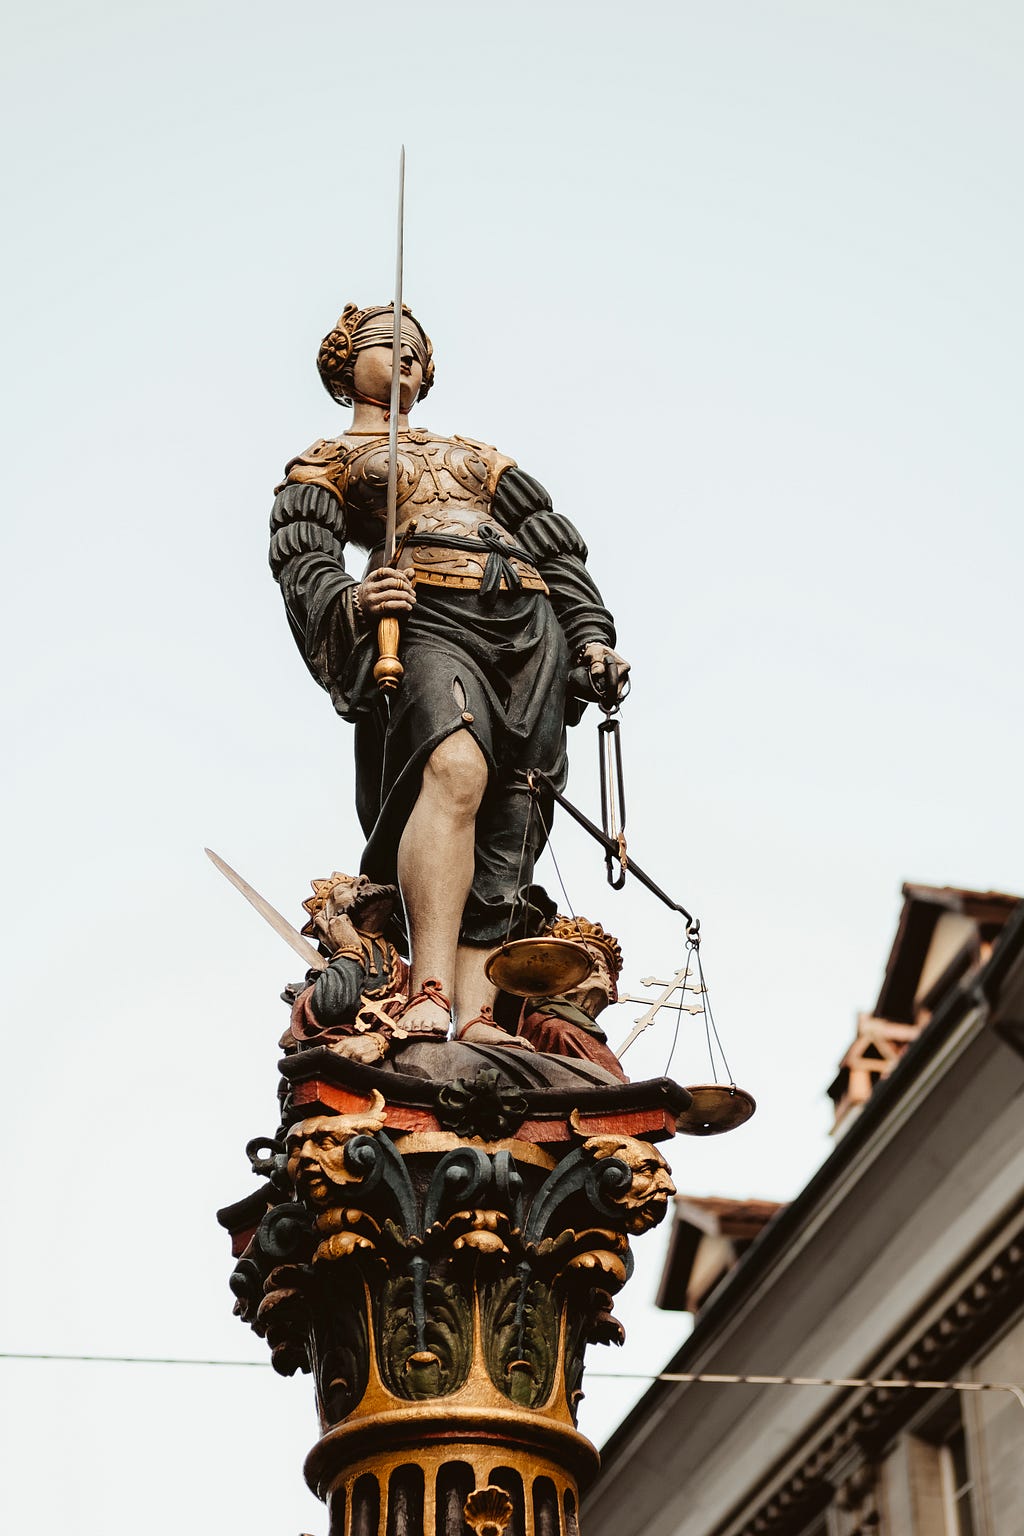 Lady Justice with her blindfold, sword, and scales looking standing tall above everyone on a pedestal